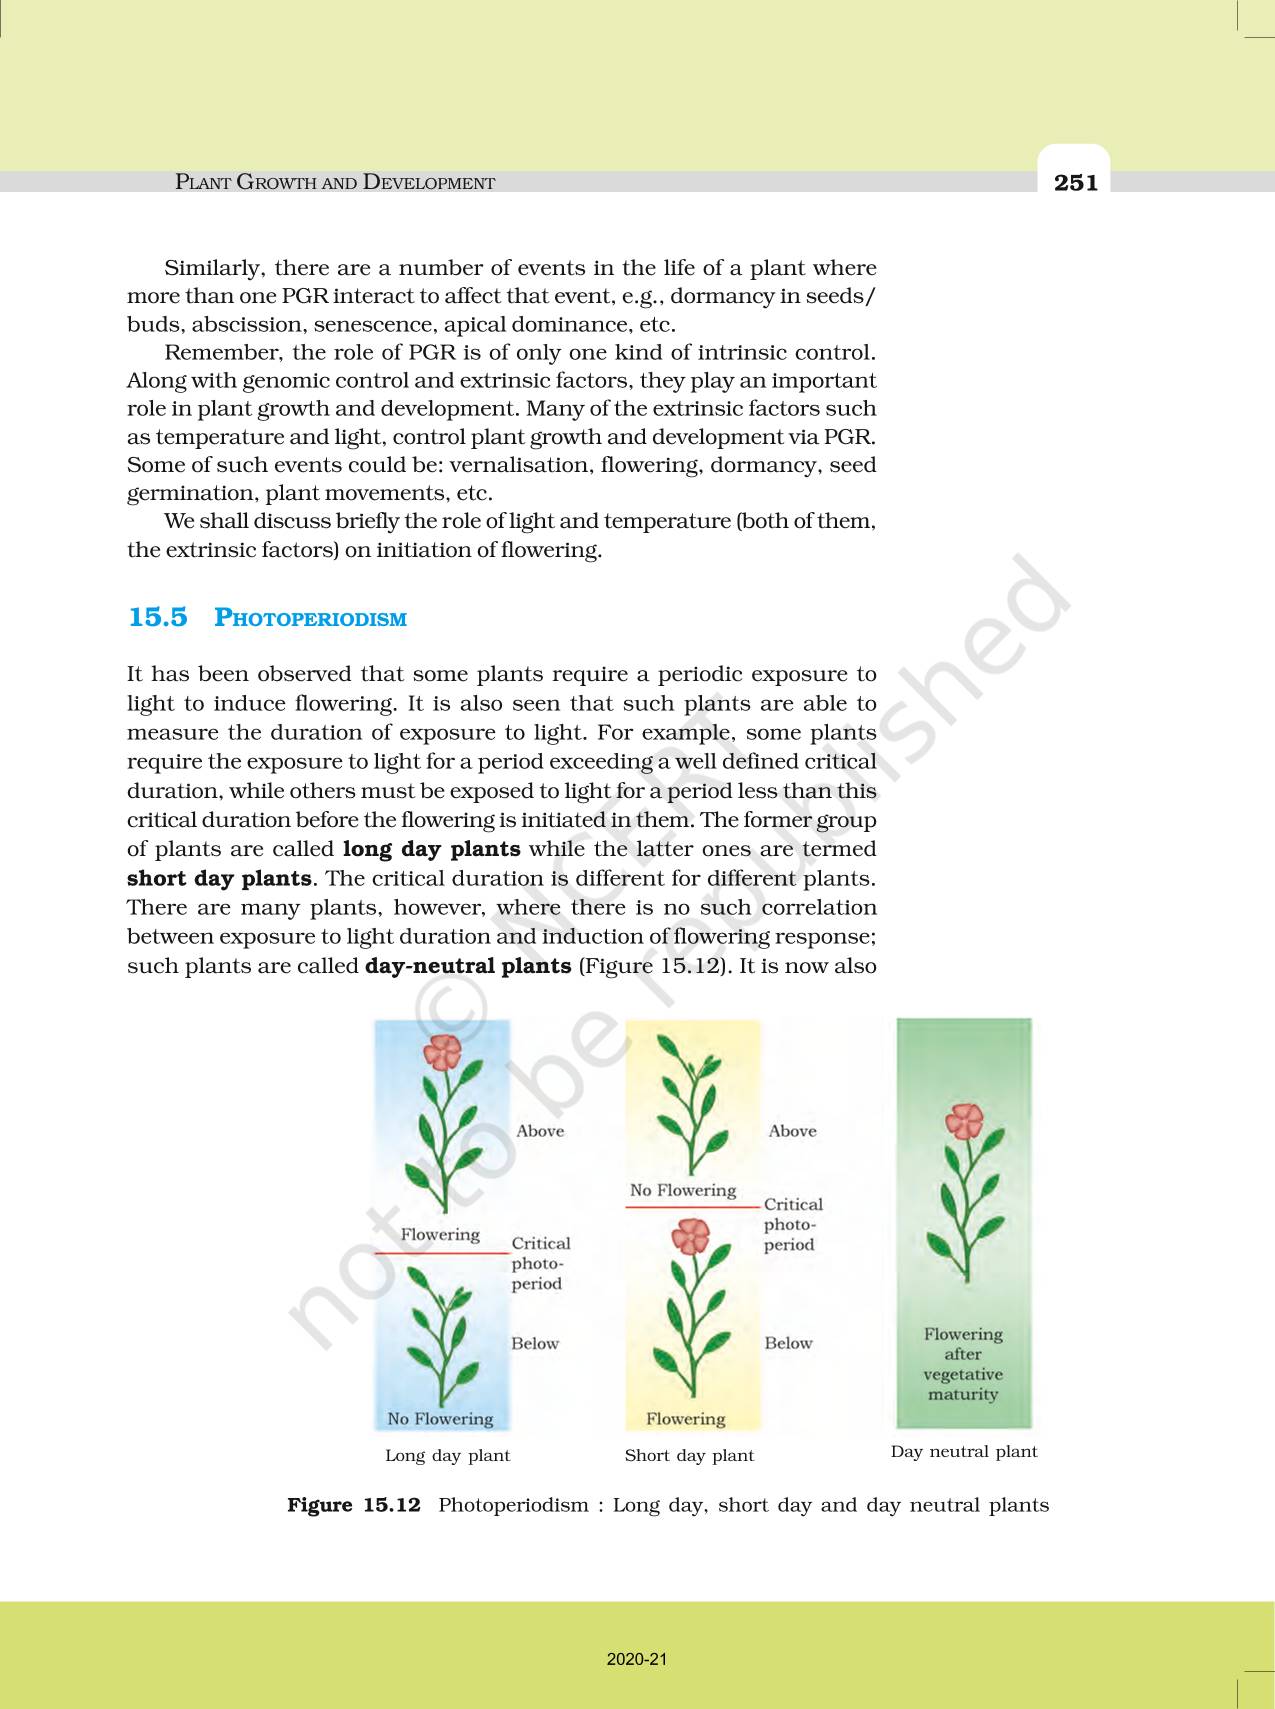 plant growth and development case study questions